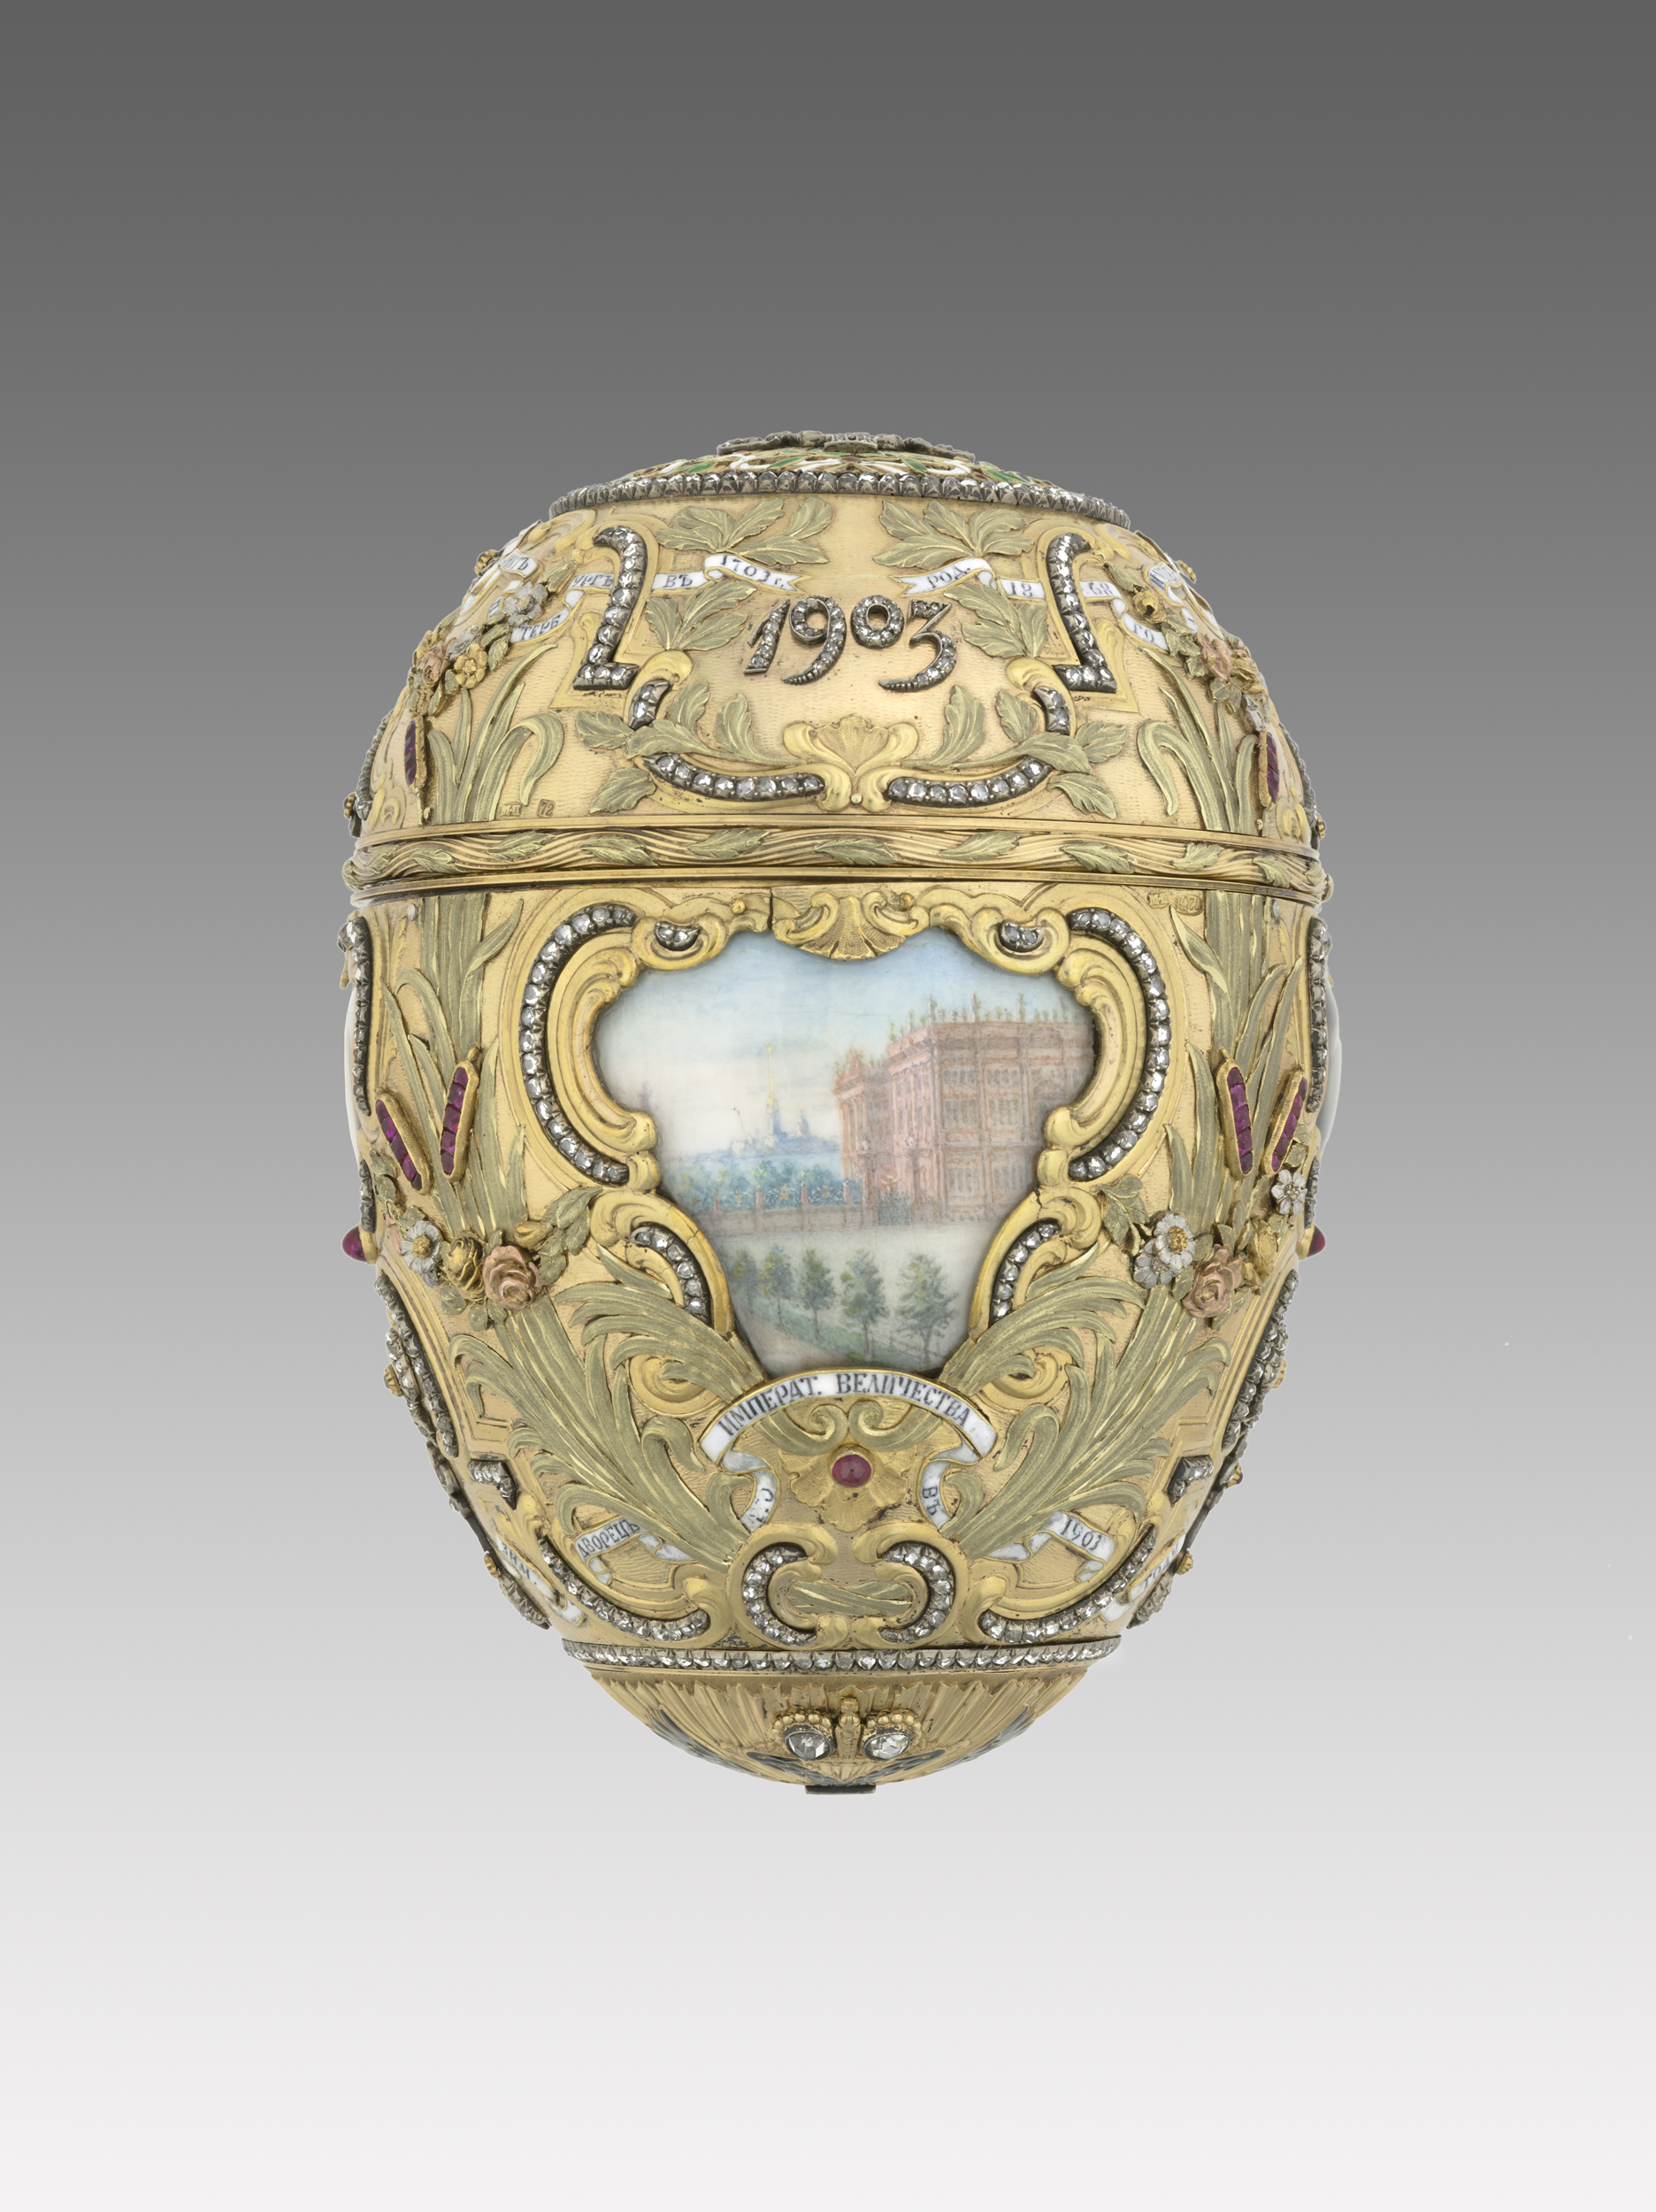 Dating back to 1903, Imperial Peter the Great Easter Egg is crafted from gold, platinum, diamond, rubies, and ivory, among other materials. Photo: Katherine Wetzel © Virginia Museum of Fine Arts.